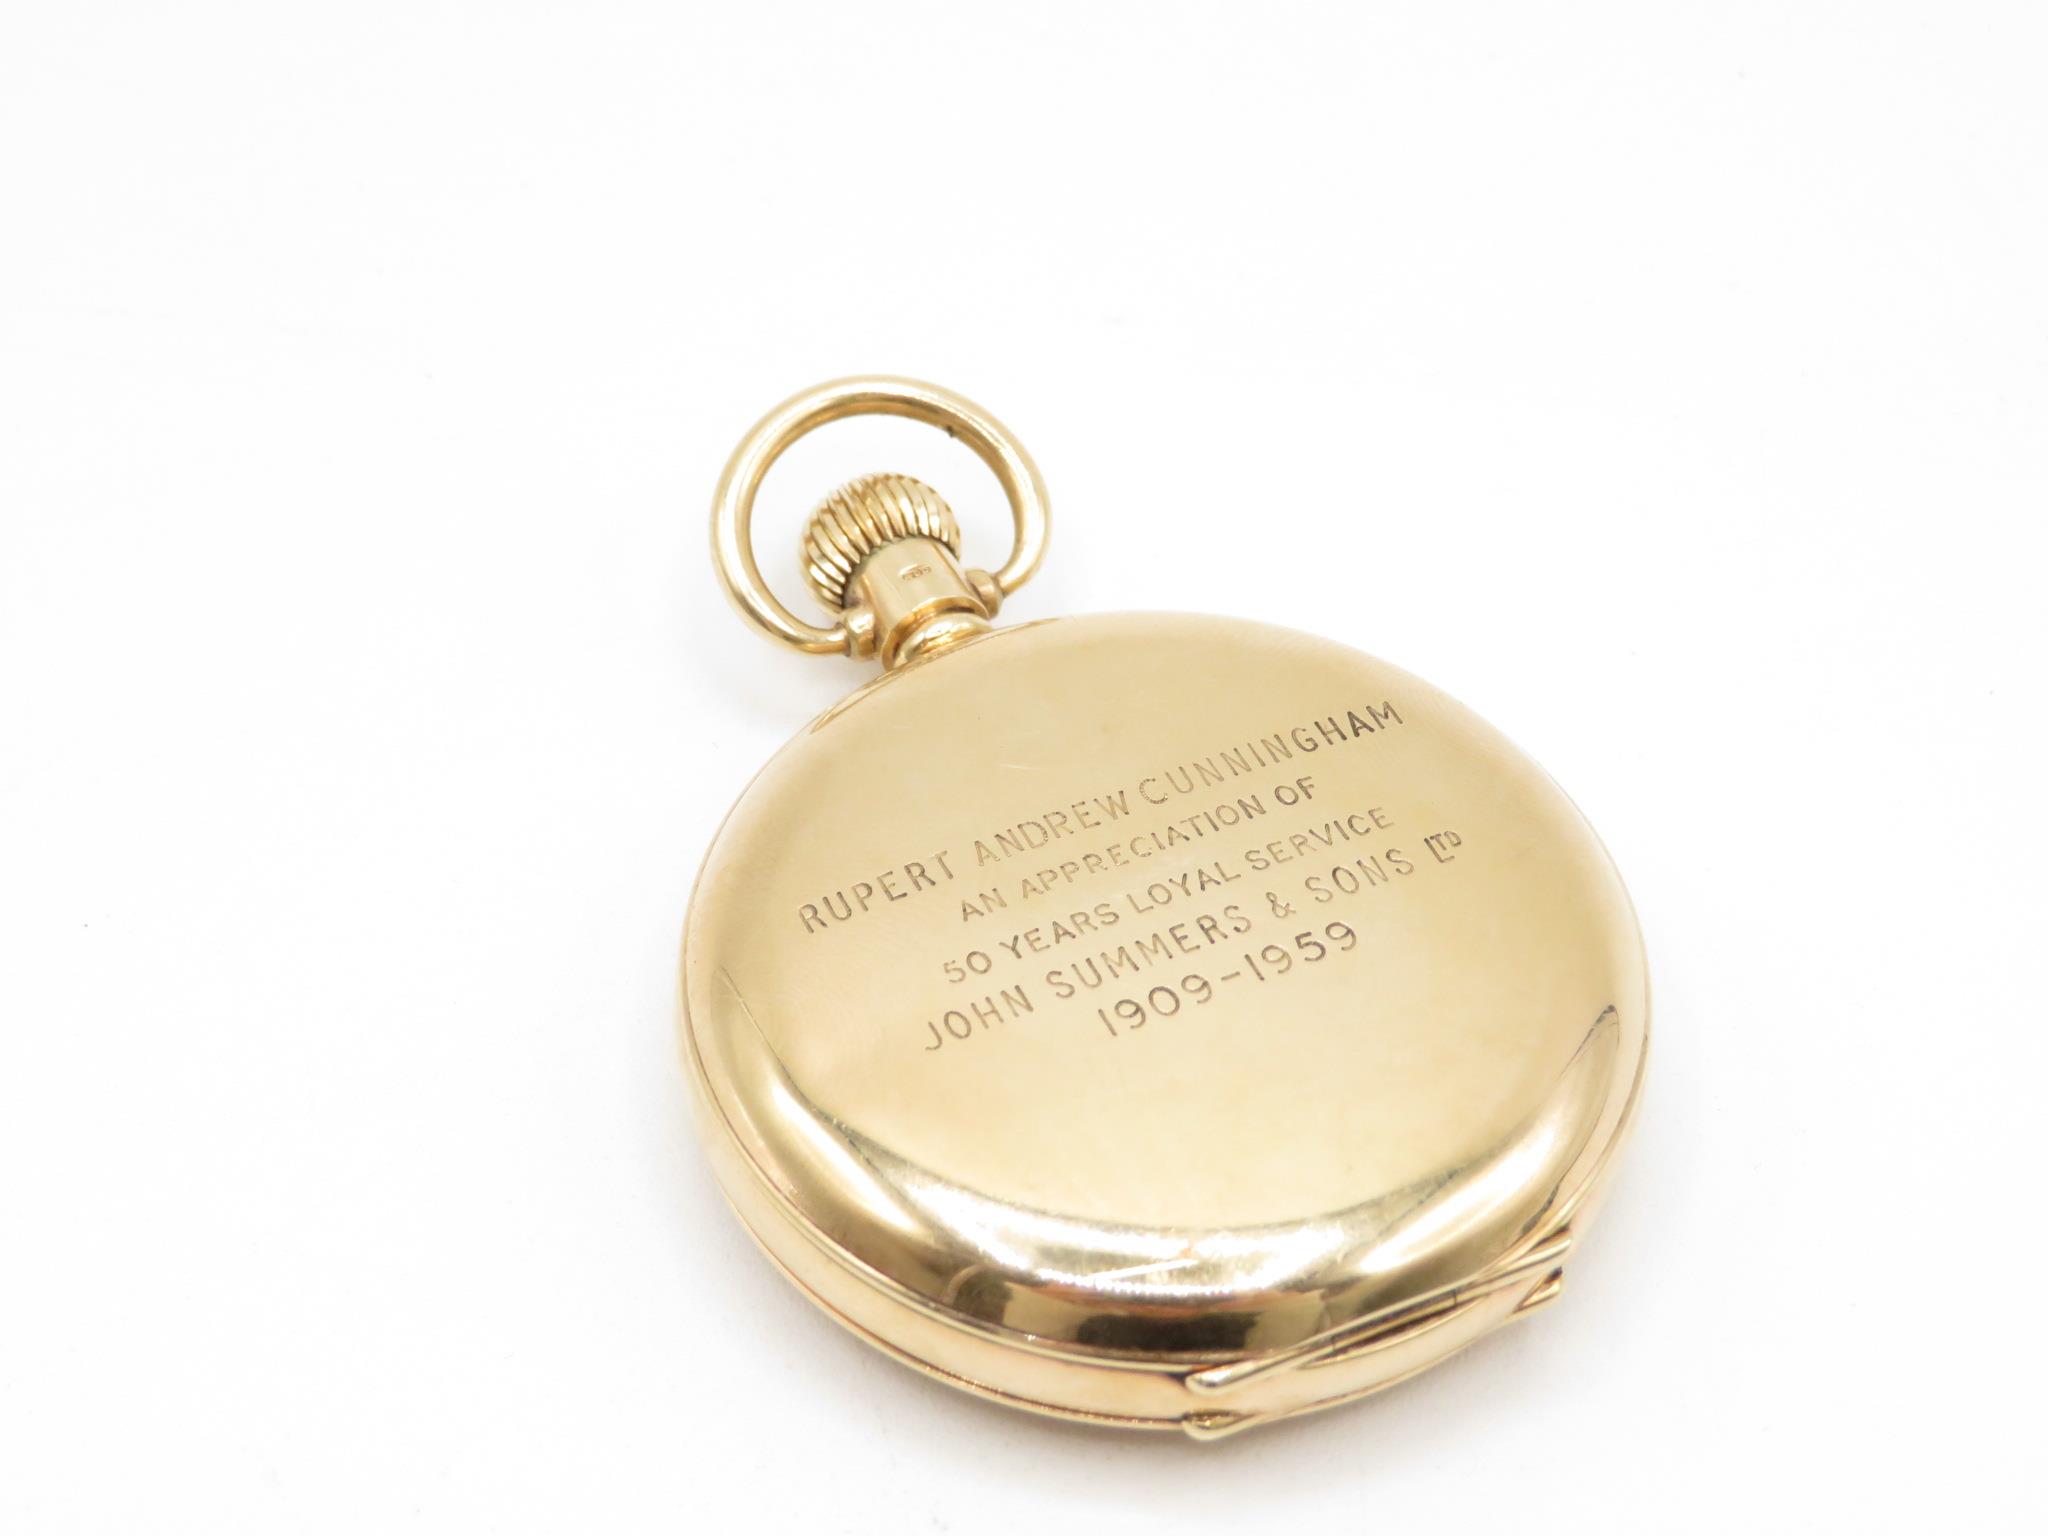 9ct gold gent's pocket watch by Vertex for Asprey signed 50 years loyal service J Summers and Sons - Image 7 of 9